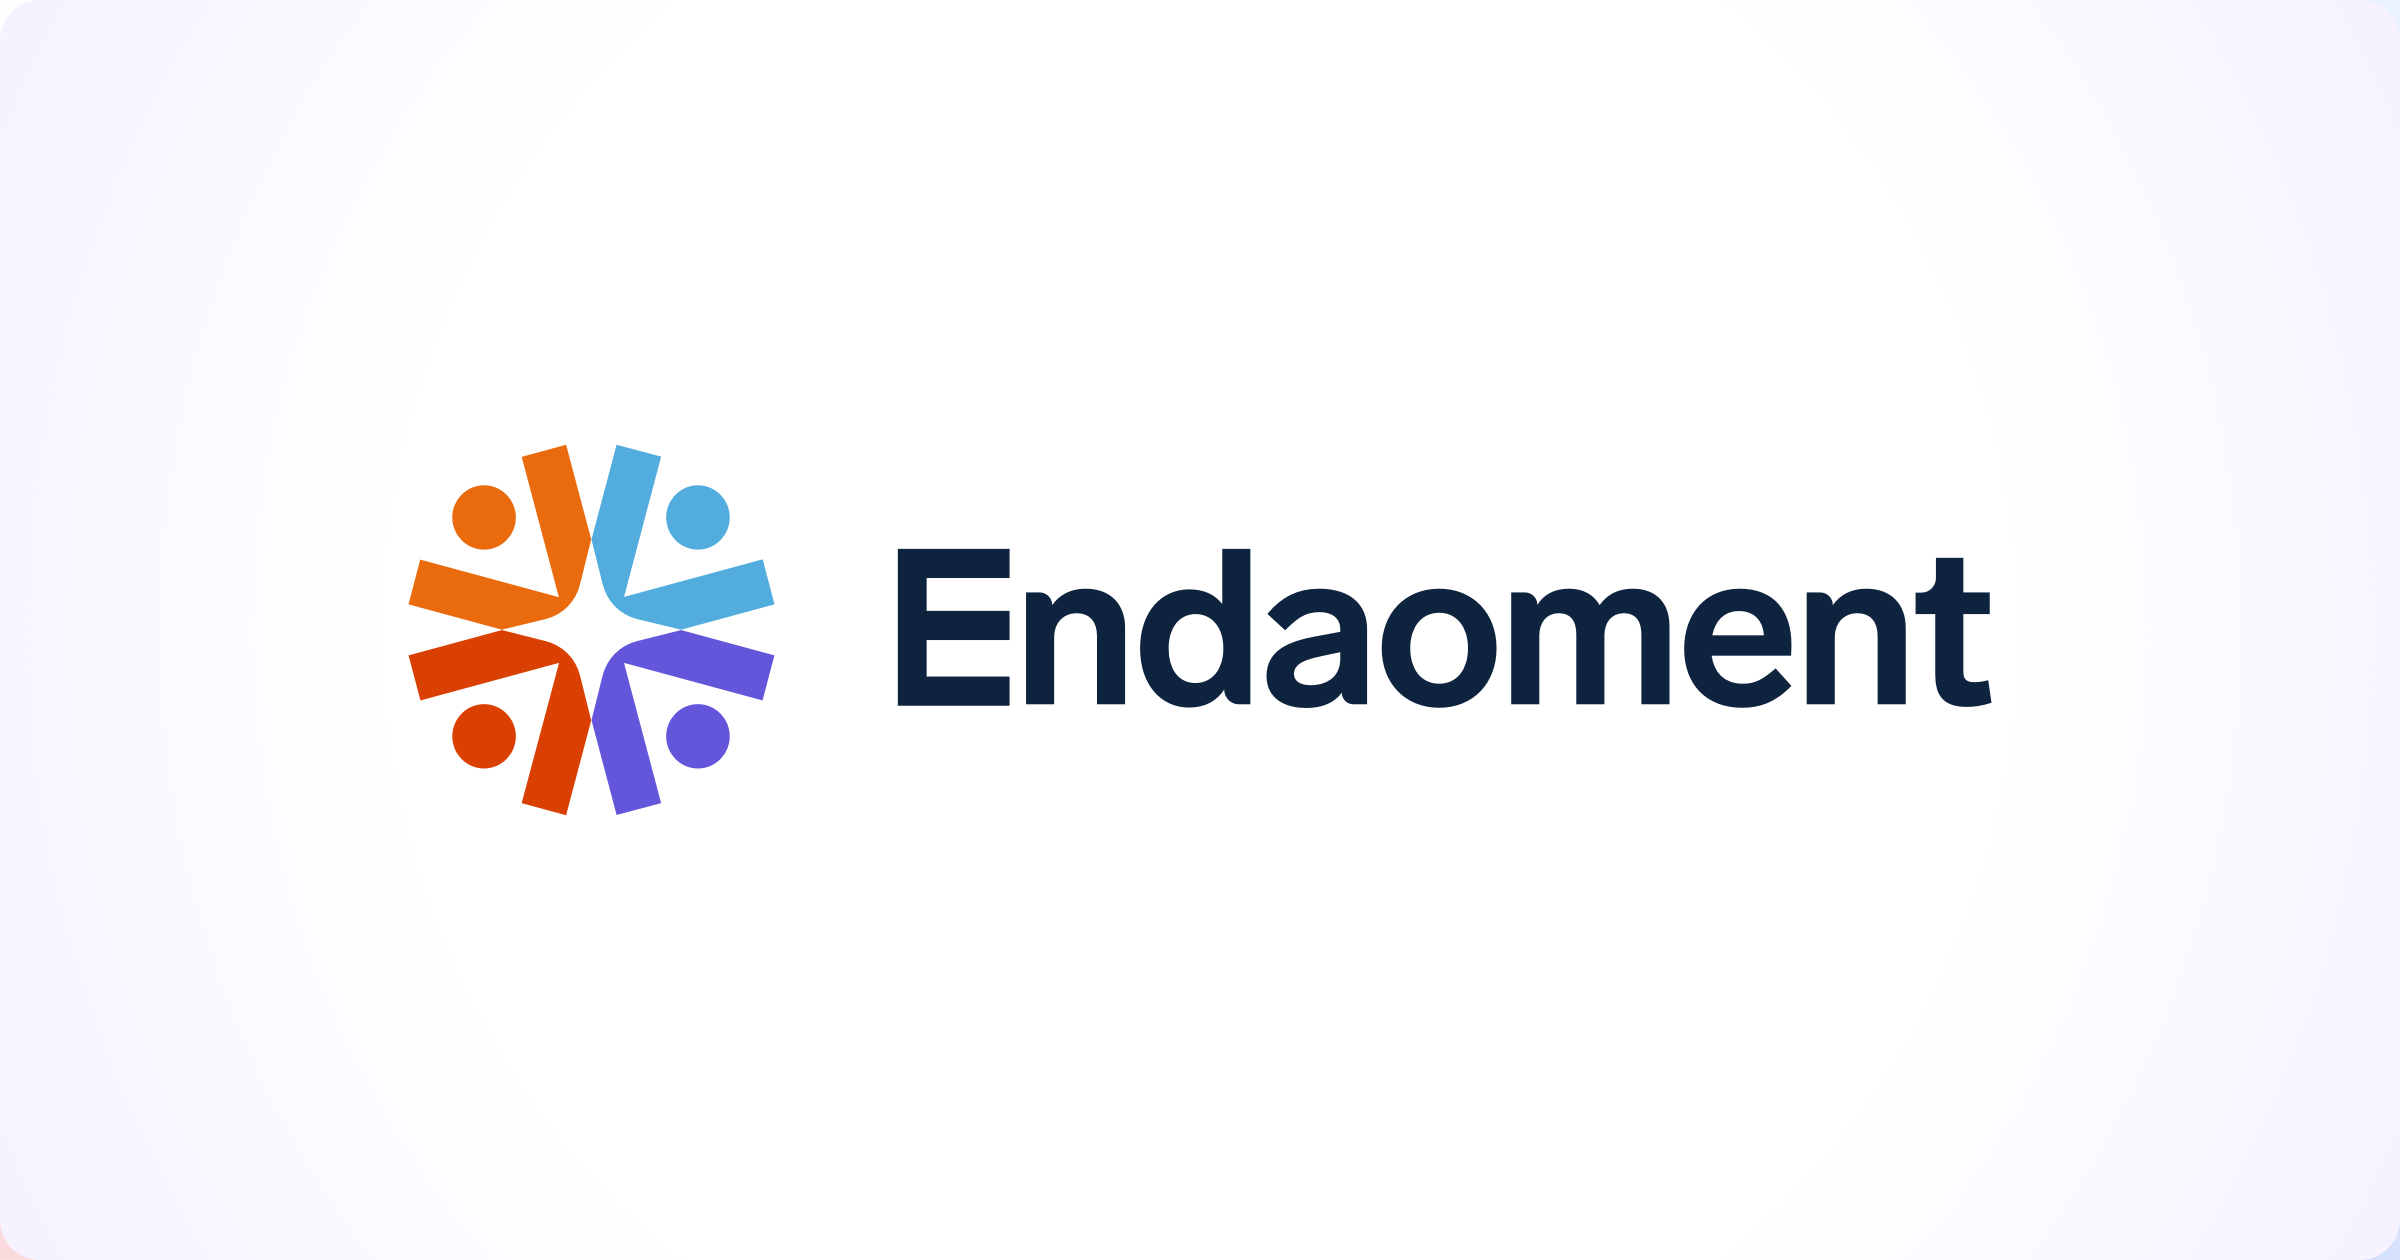 Endaoment uses USDC to pioneer a new digital fundraising model